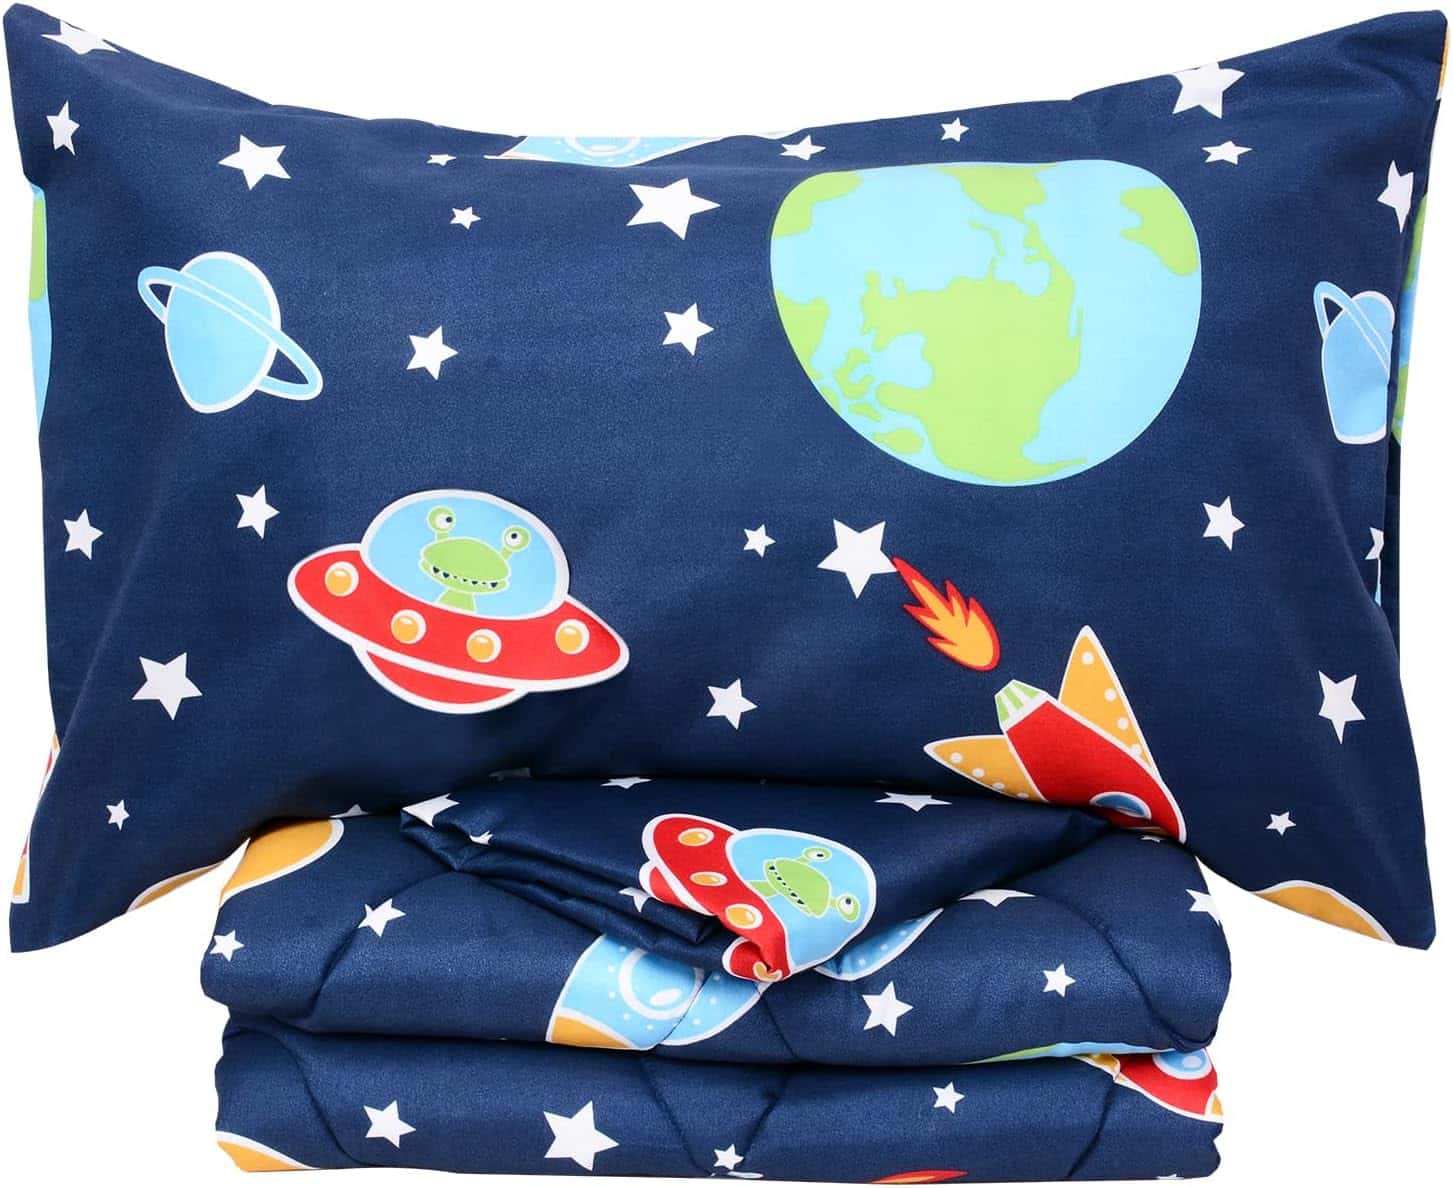 Cloele 3 Piece Toddler Bedding Set - The Perfect Space-Themed Bedding for Your Little Astronaut